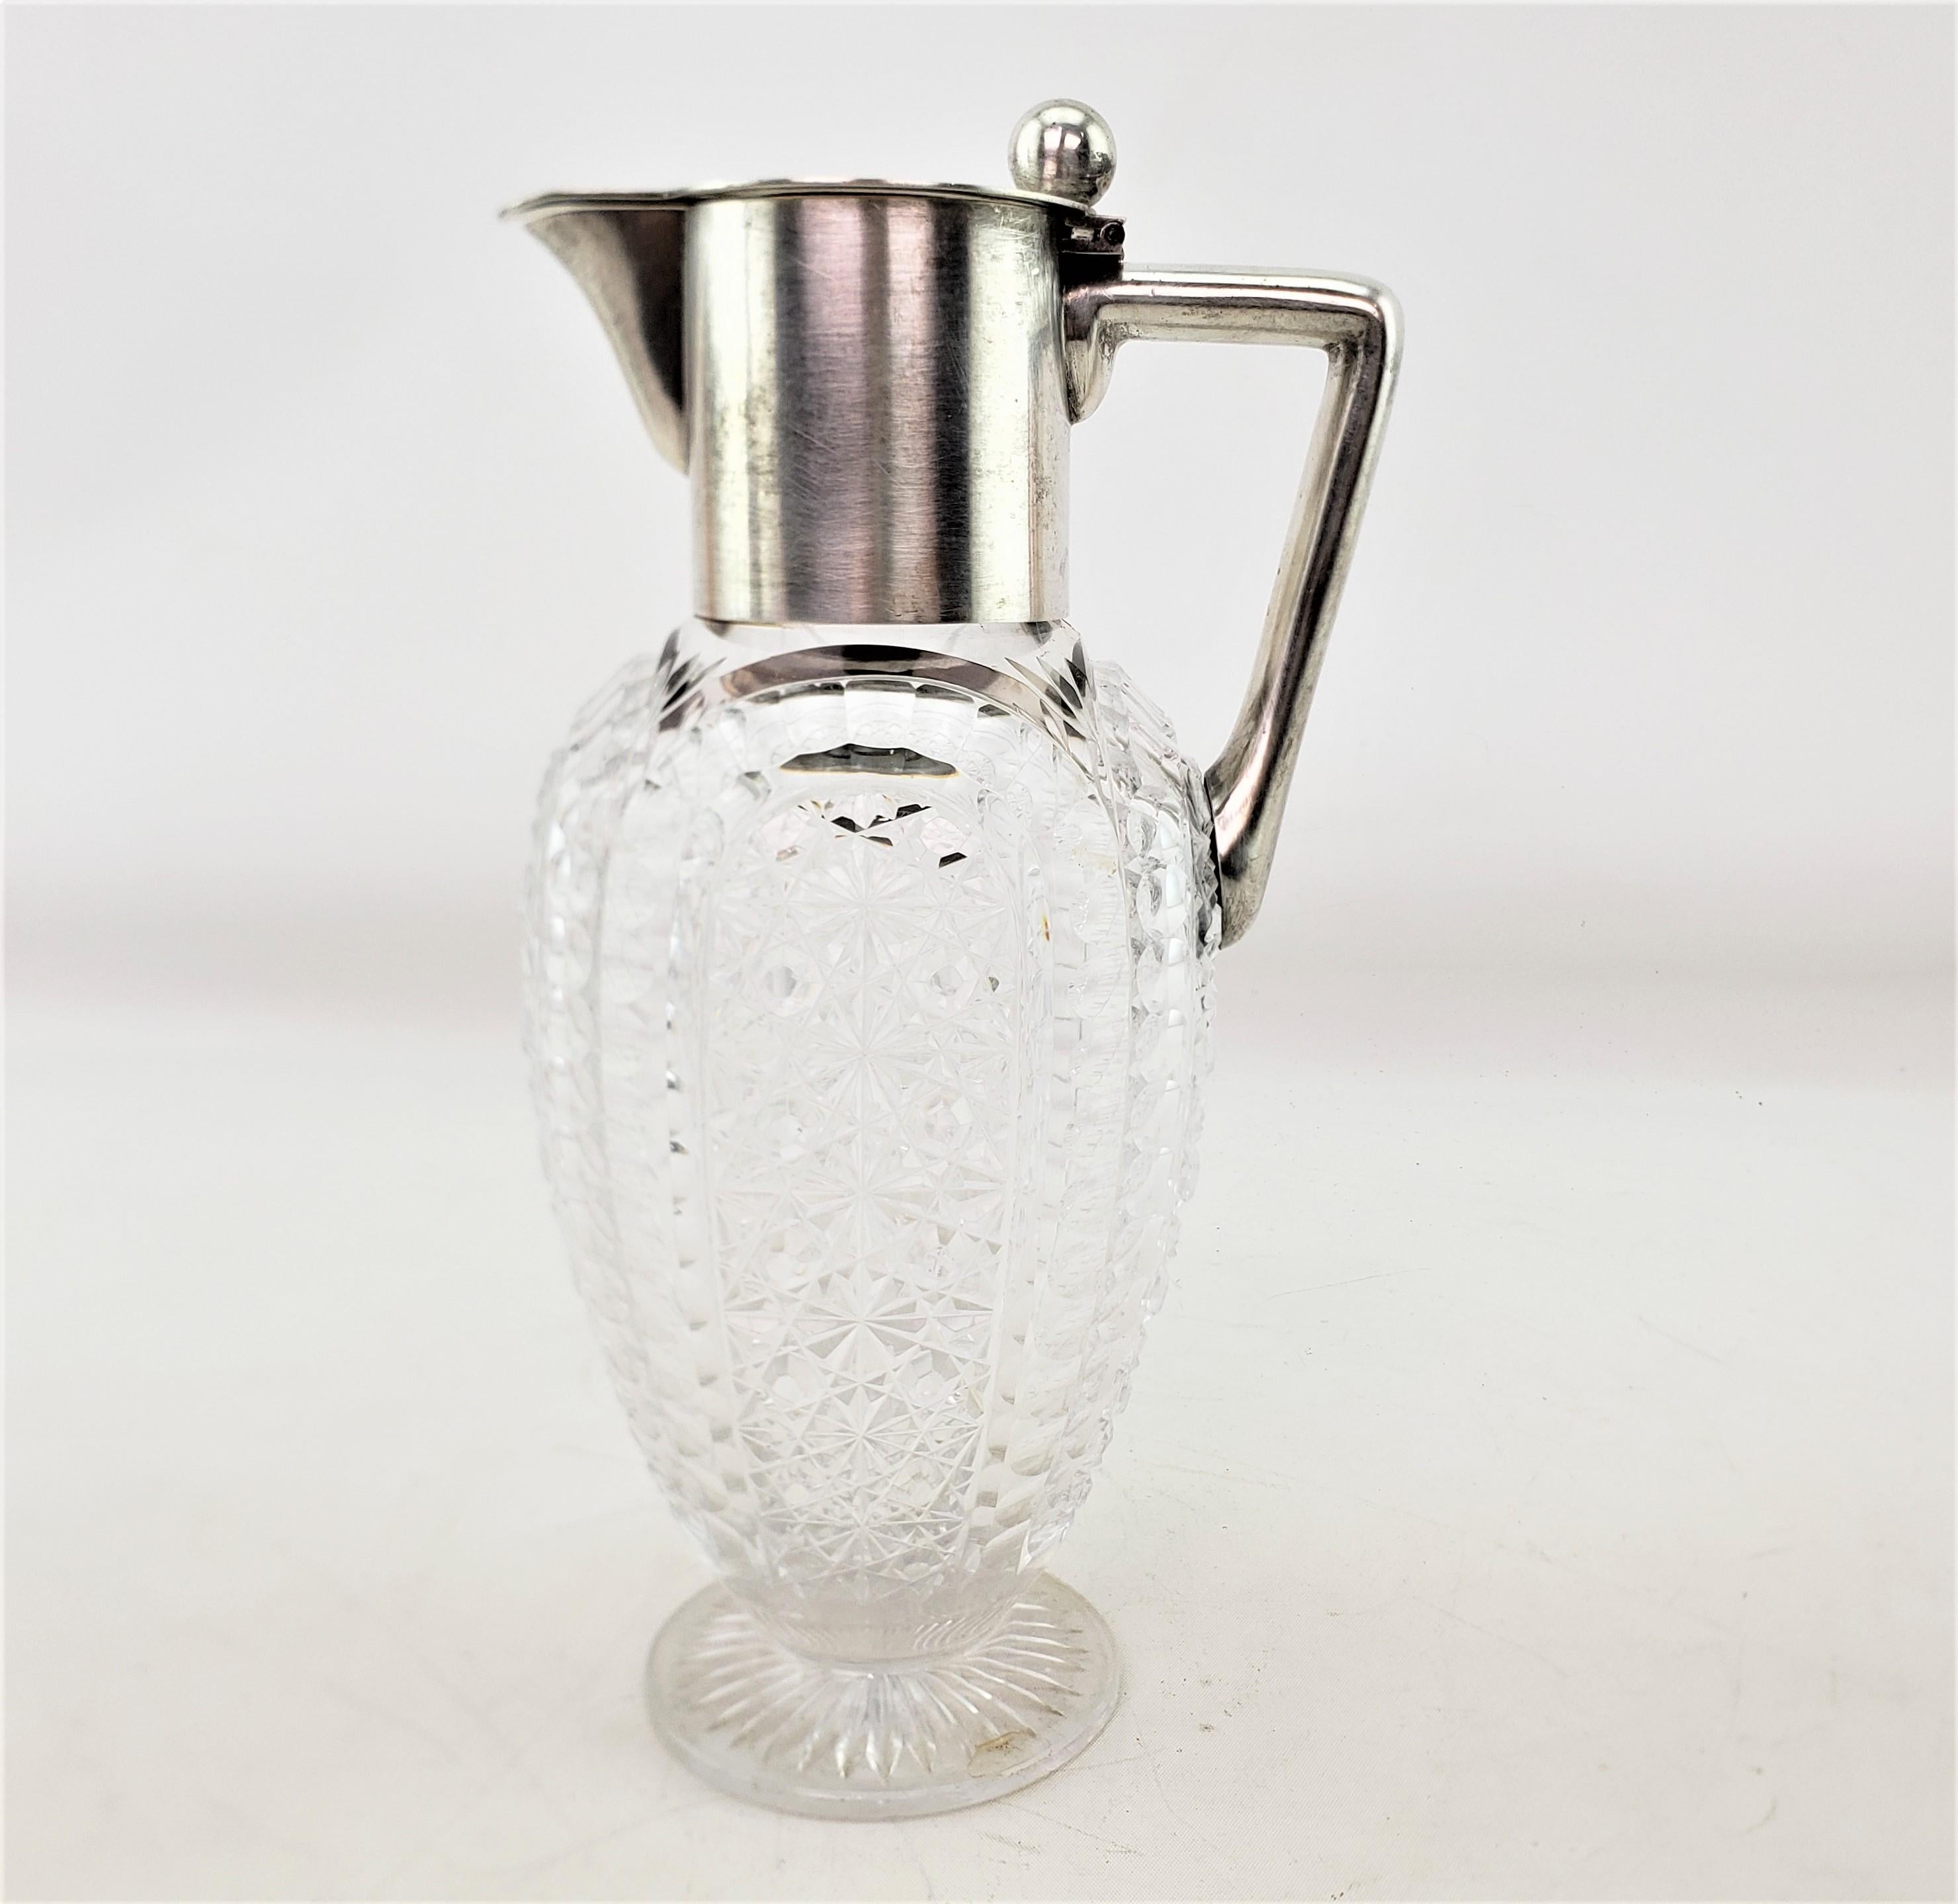 This antique claret jug is hallmarked by an unknown maker, and believed to have originated from Germany and date to approximately 1920 and done in the period Art Deco style. The body of the jug is composed of a very heavy and deeply cut crystal with